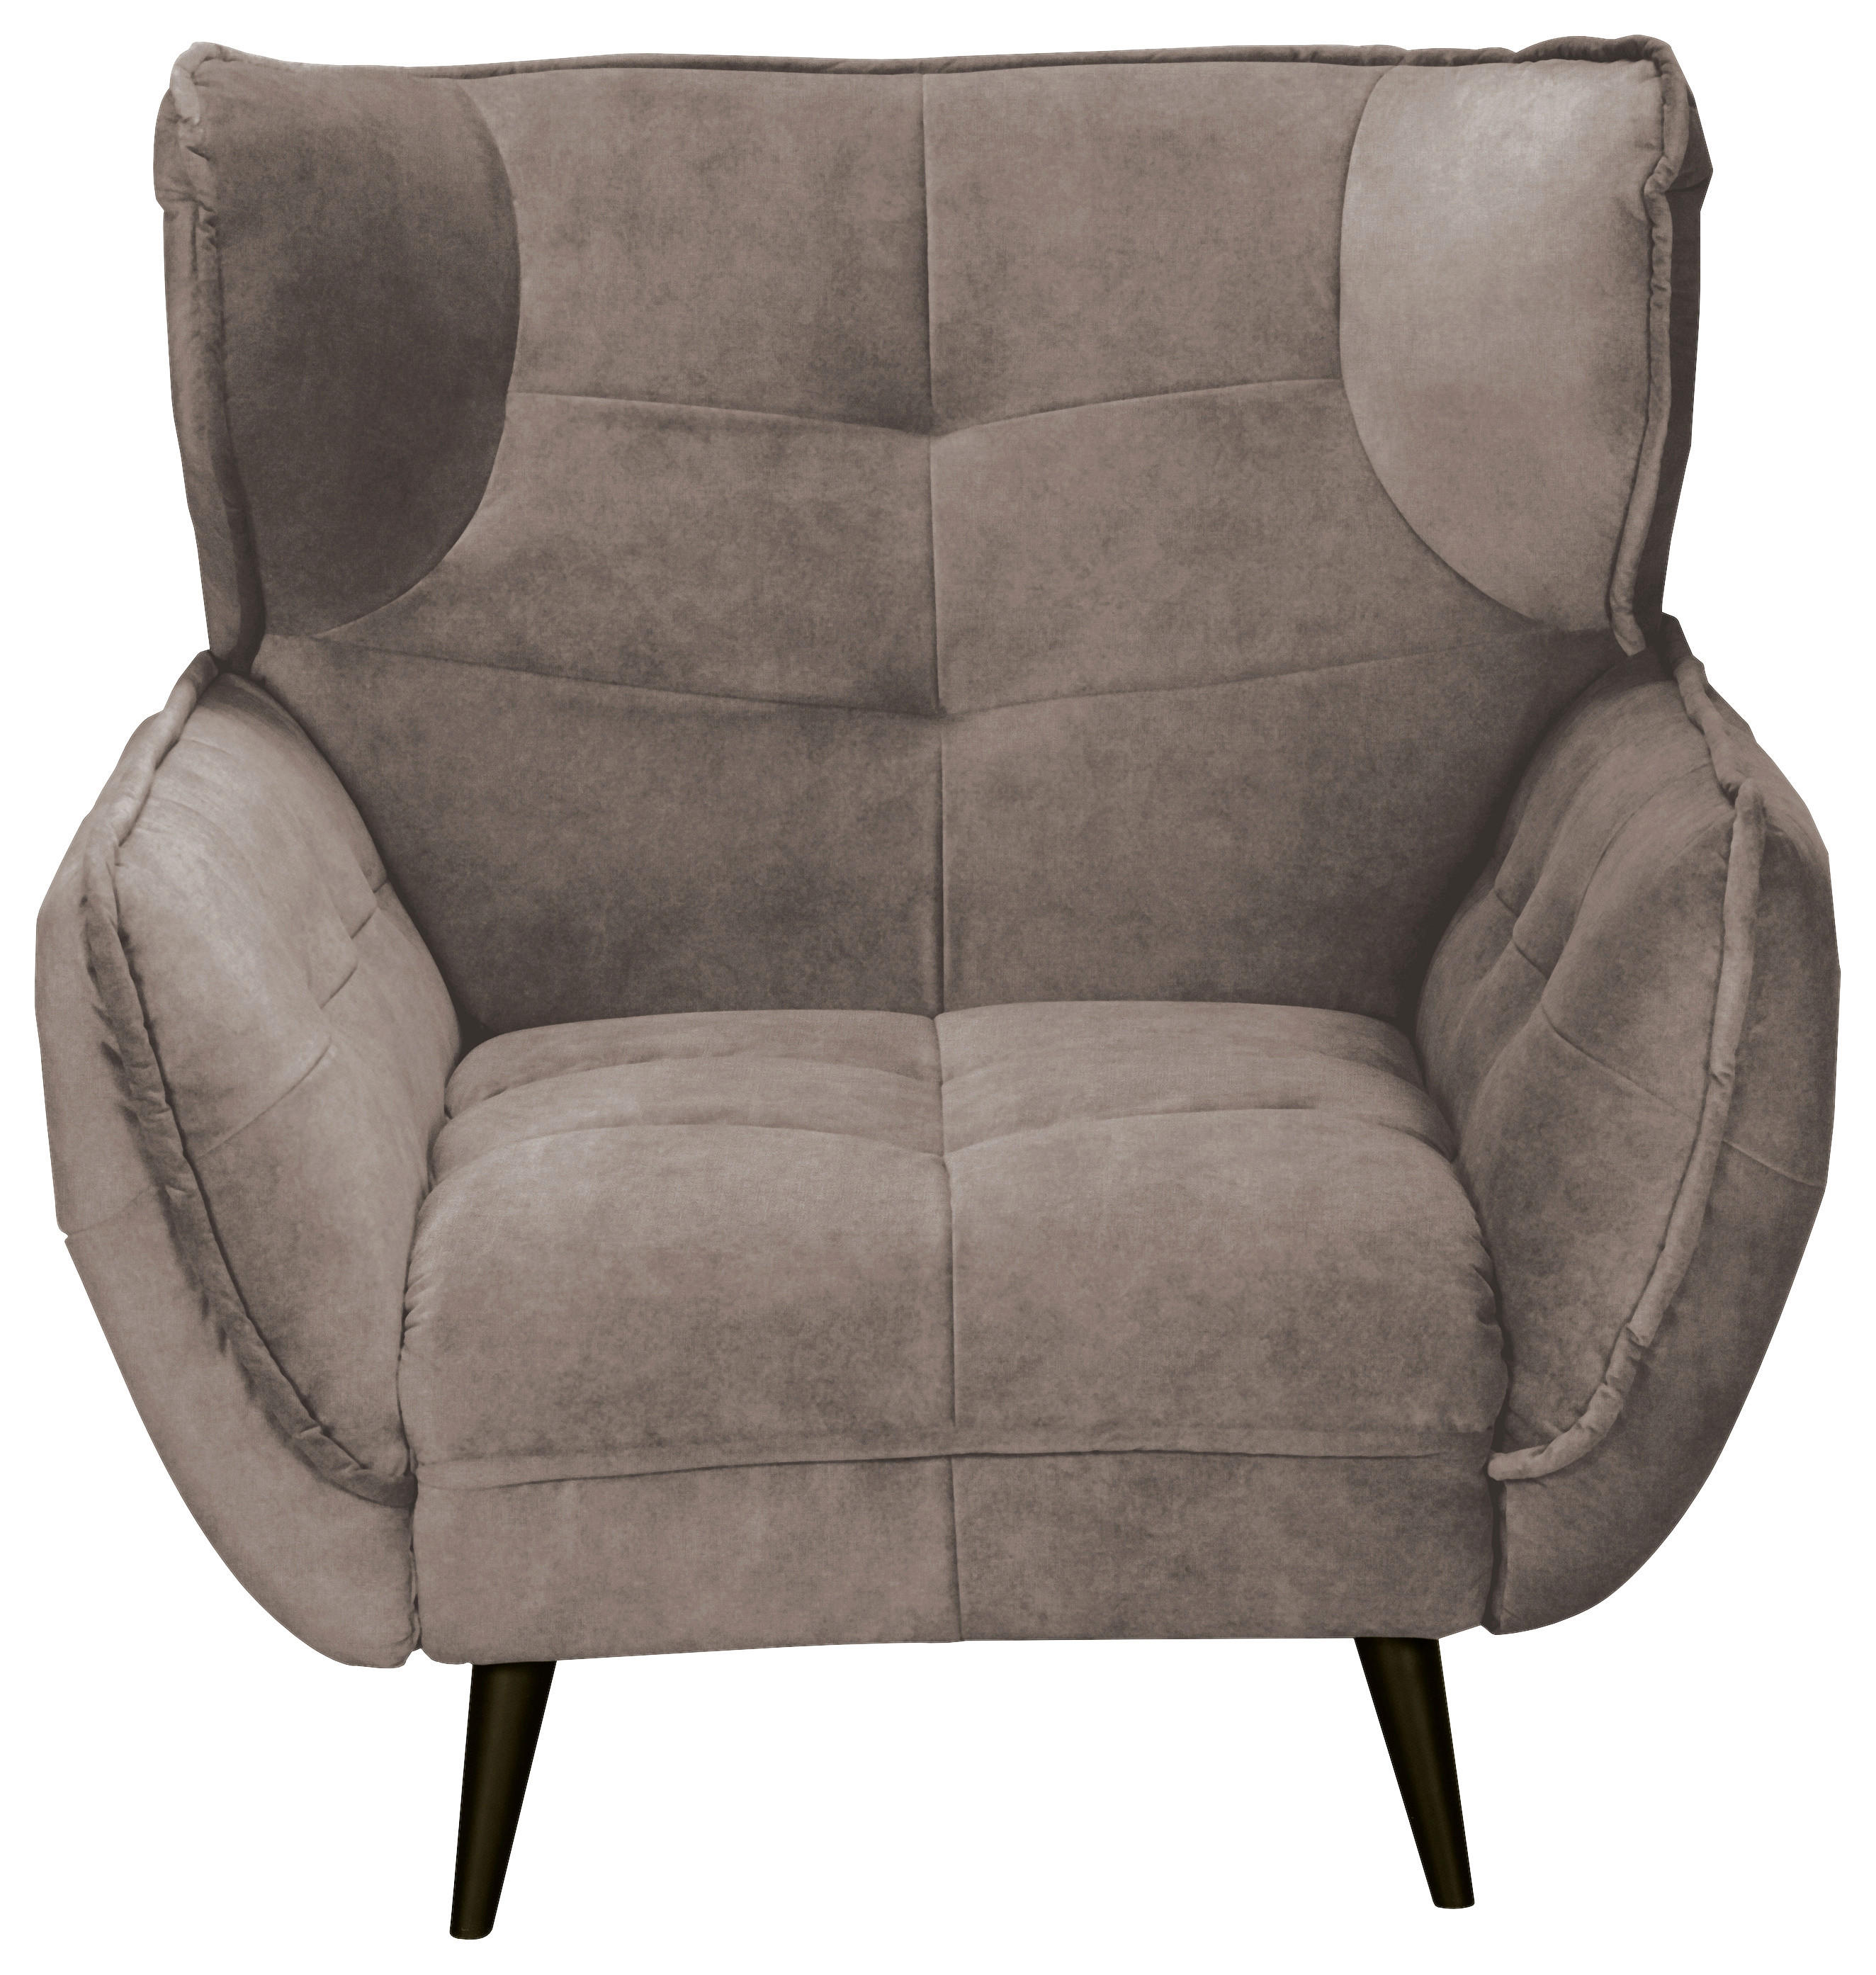 Sessel Taupe B/H/T: ca. 103x105x98 cm Ariana_MM13113_Sessel - Taupe (103,00/105,00/98,00cm)